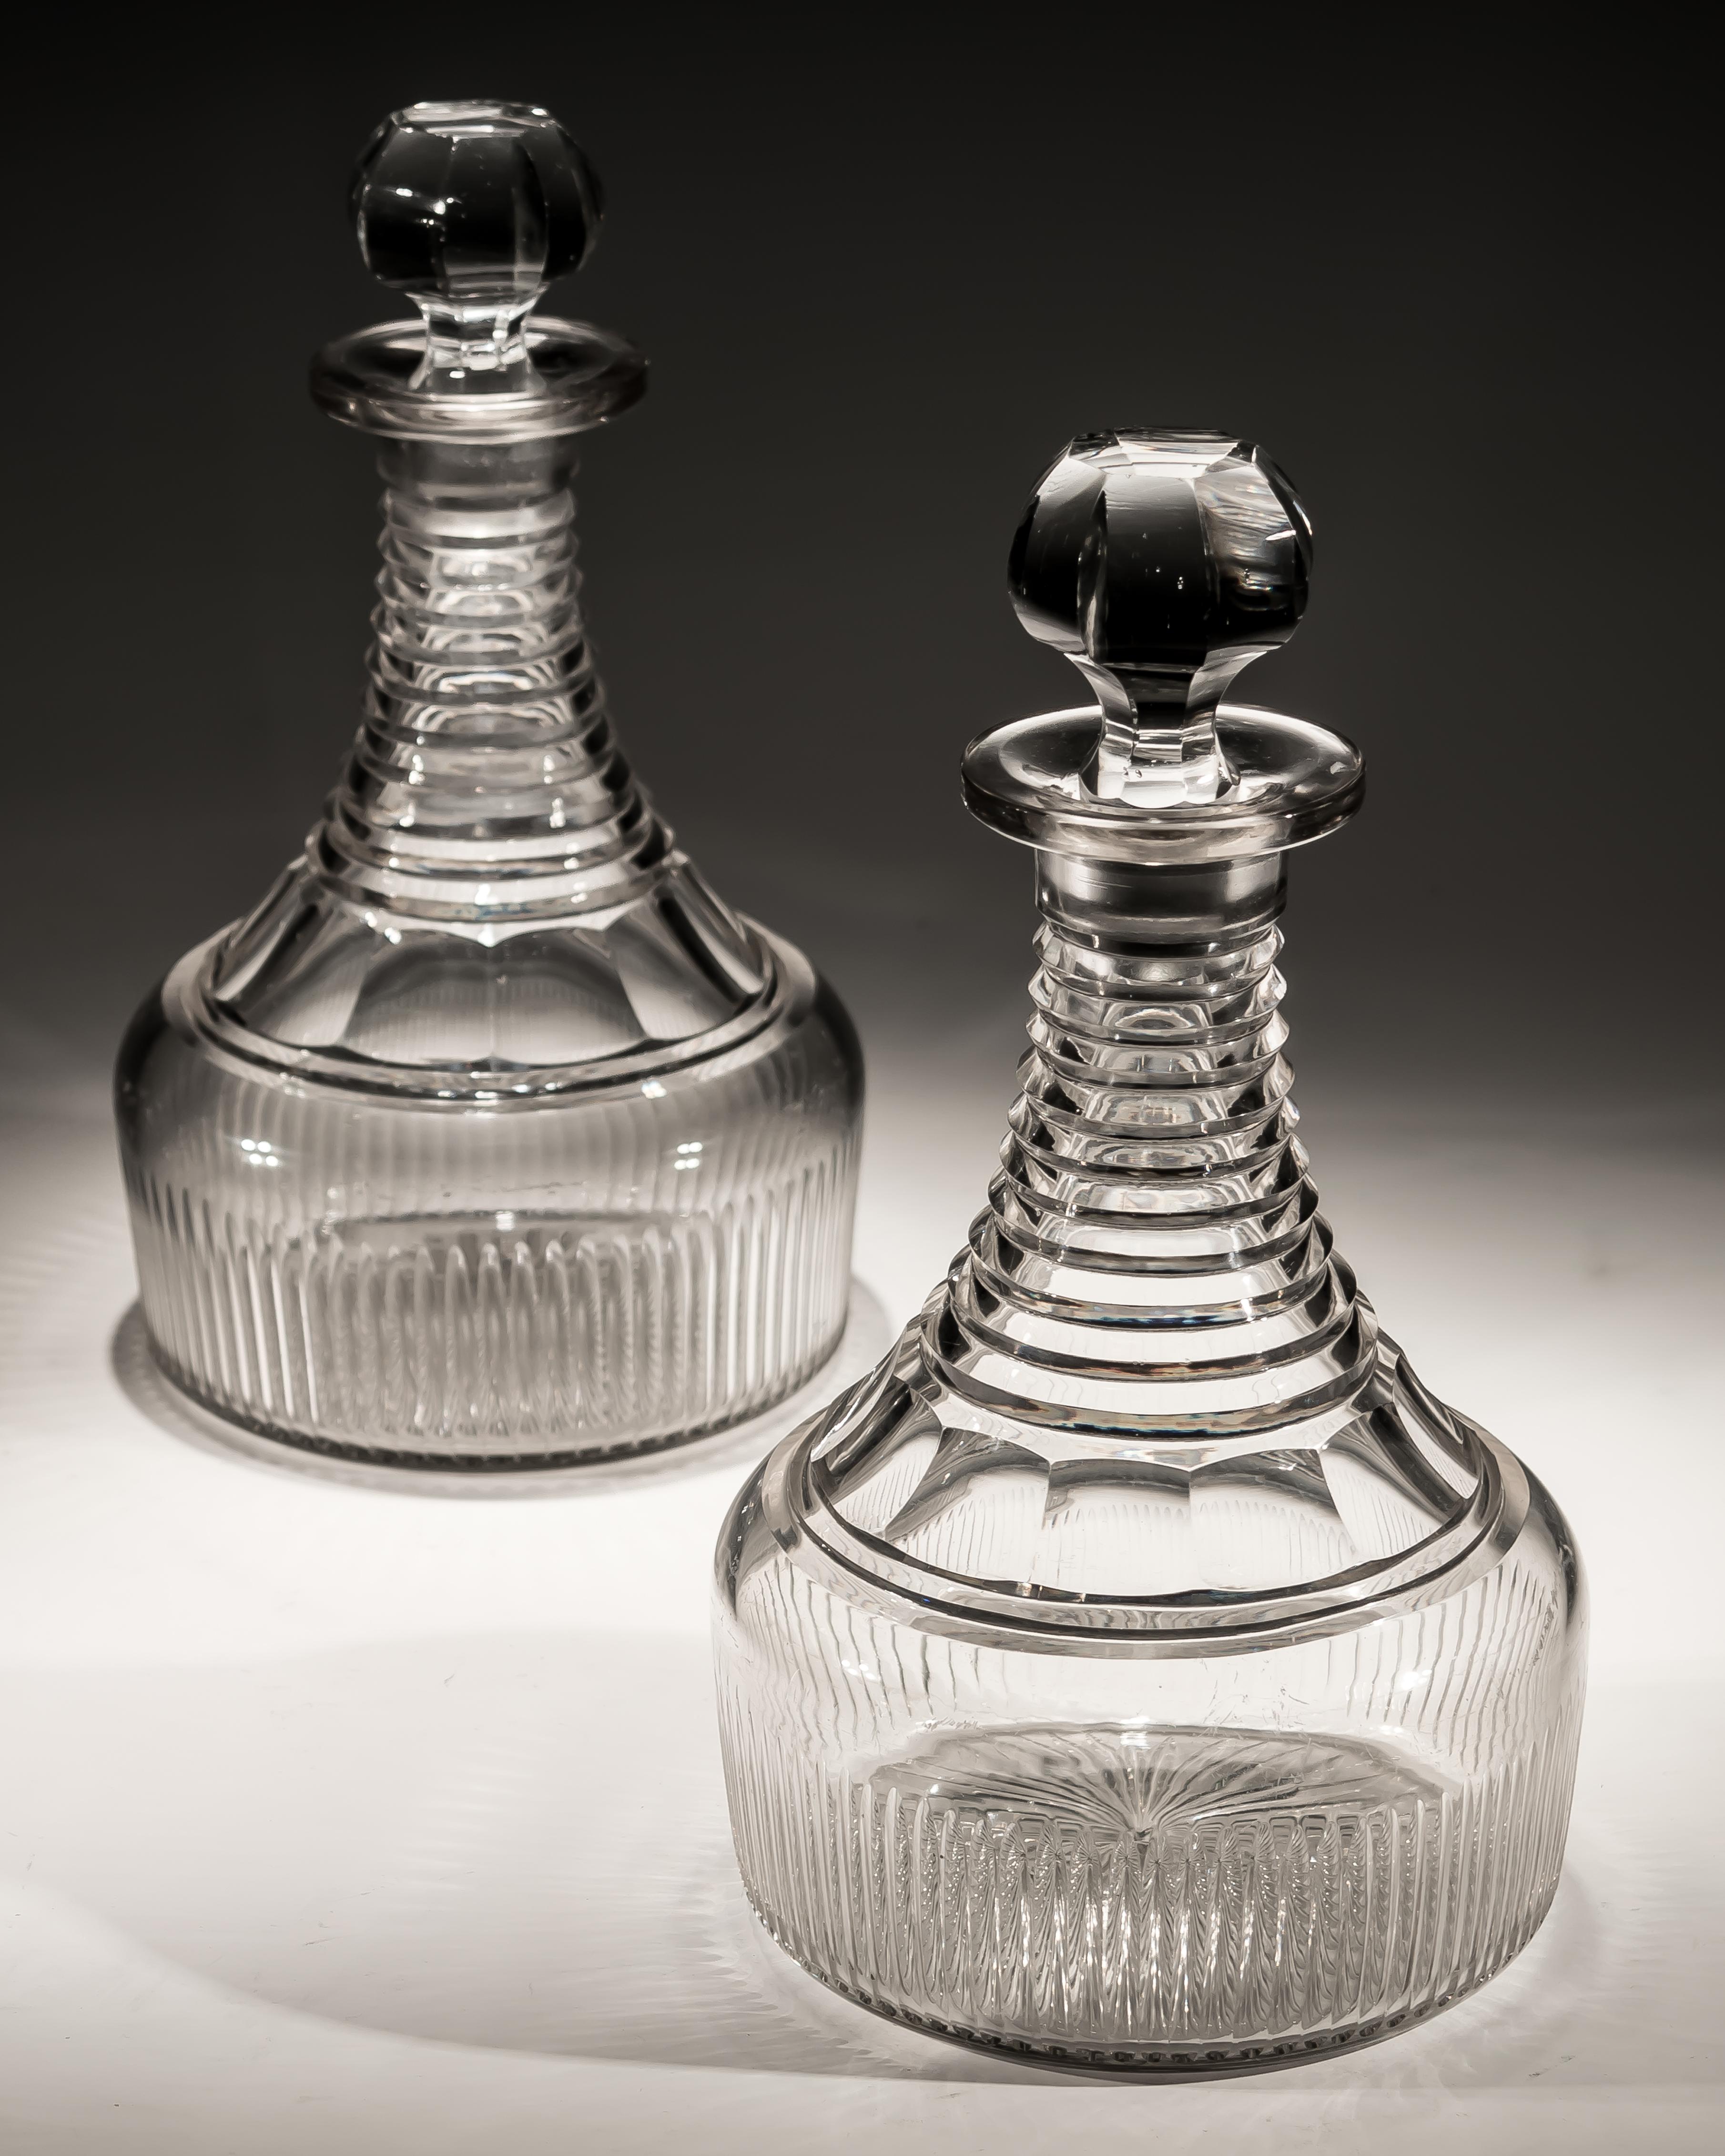 A fine pair of Regency step and flute cut semi ships decanters.